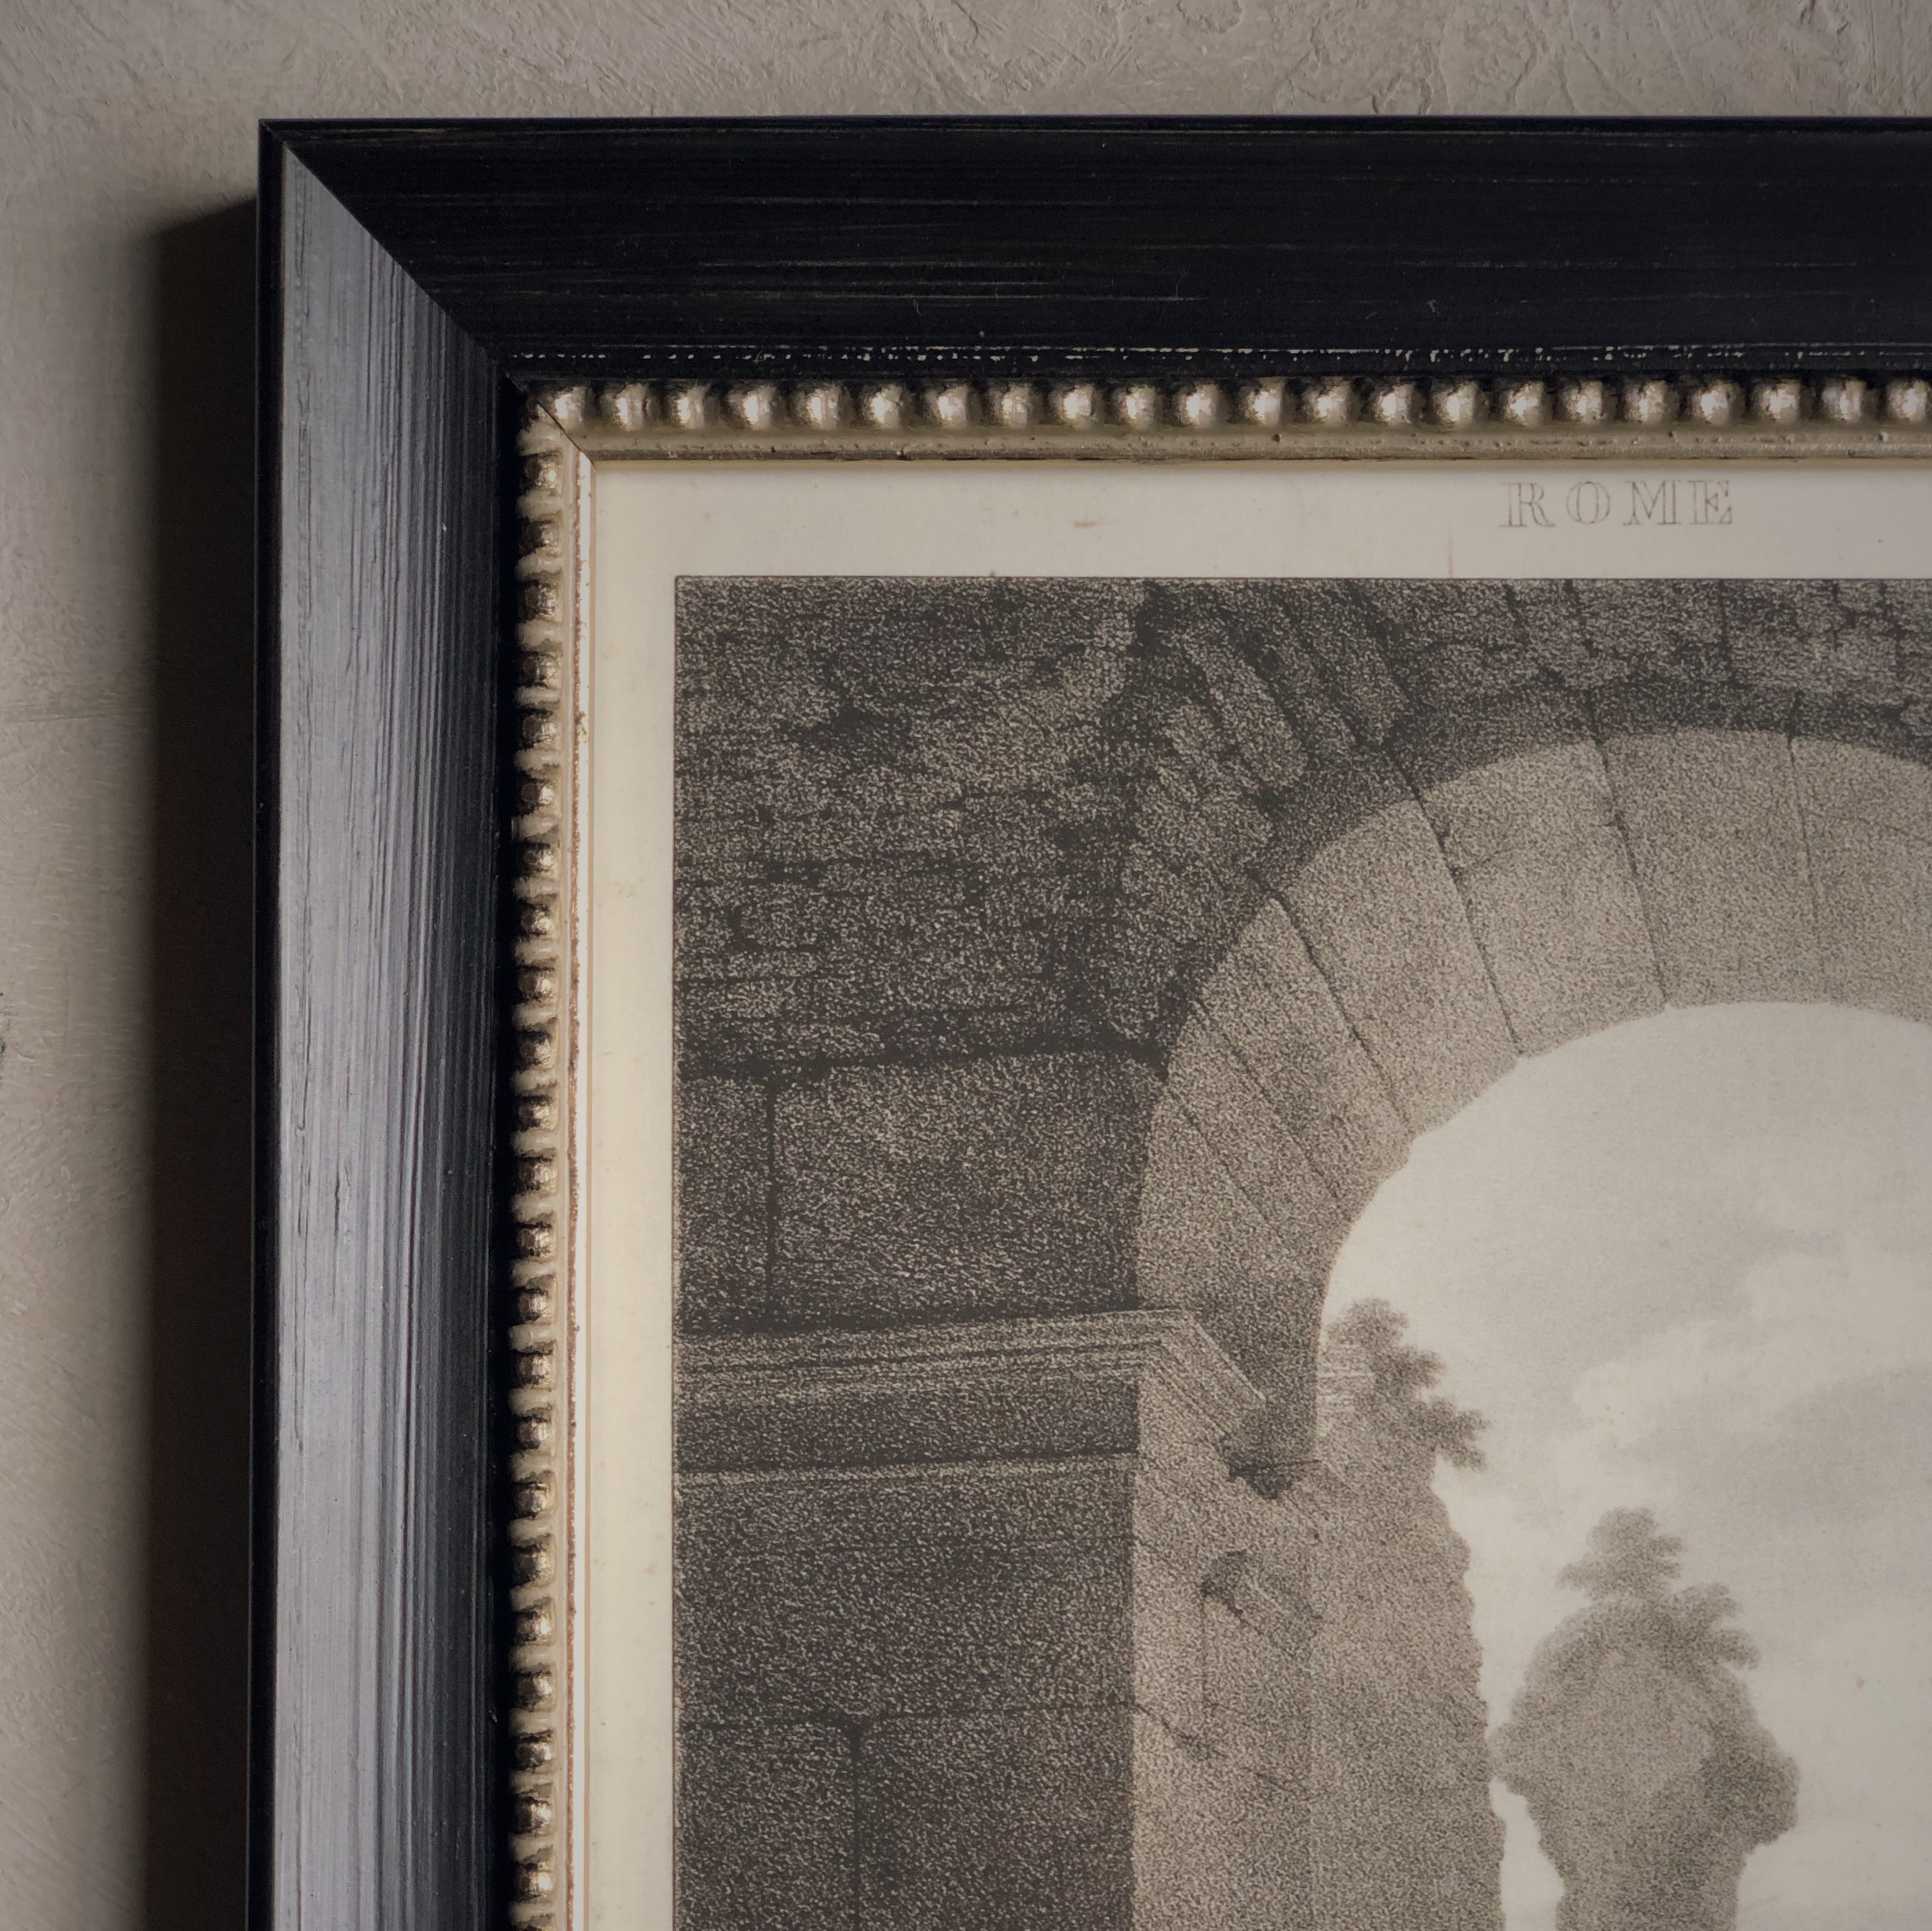 VINTAGE FRAME - WHEN IN ROME